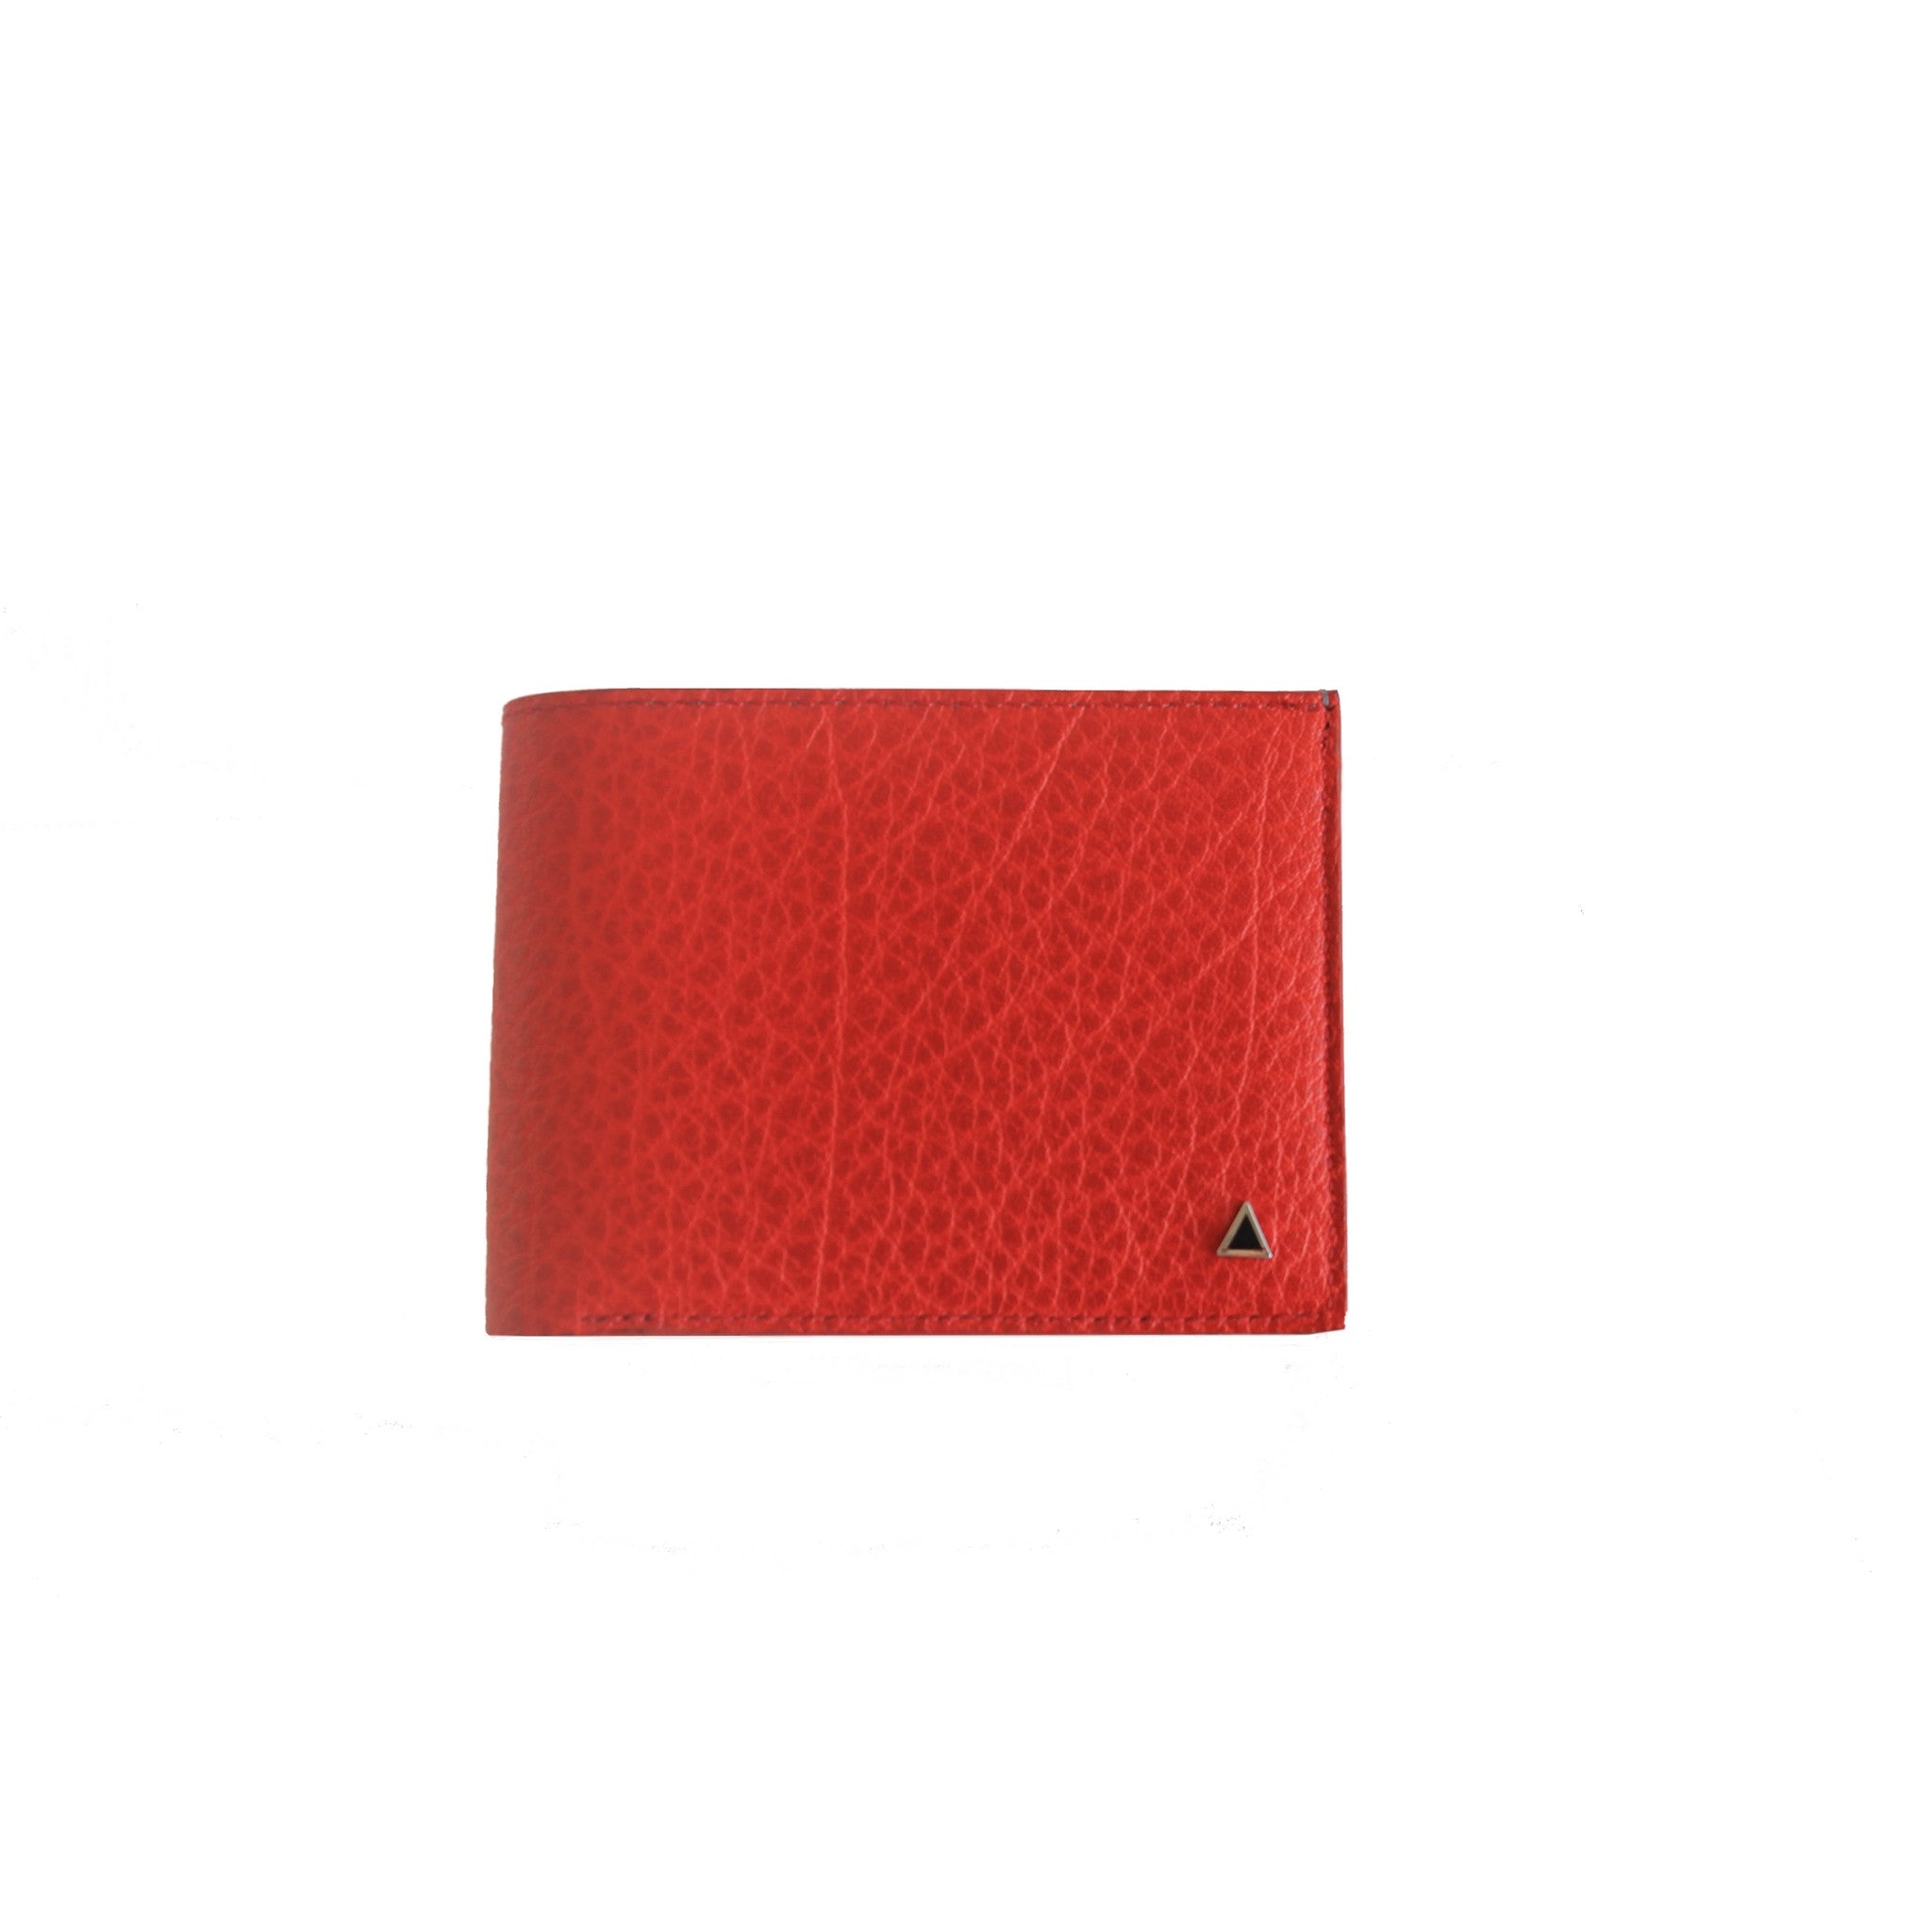 Made in FRANCE Gambetta Luxury Wallet in Red Buffalo by Anonyme Paris (16  credit card slots)